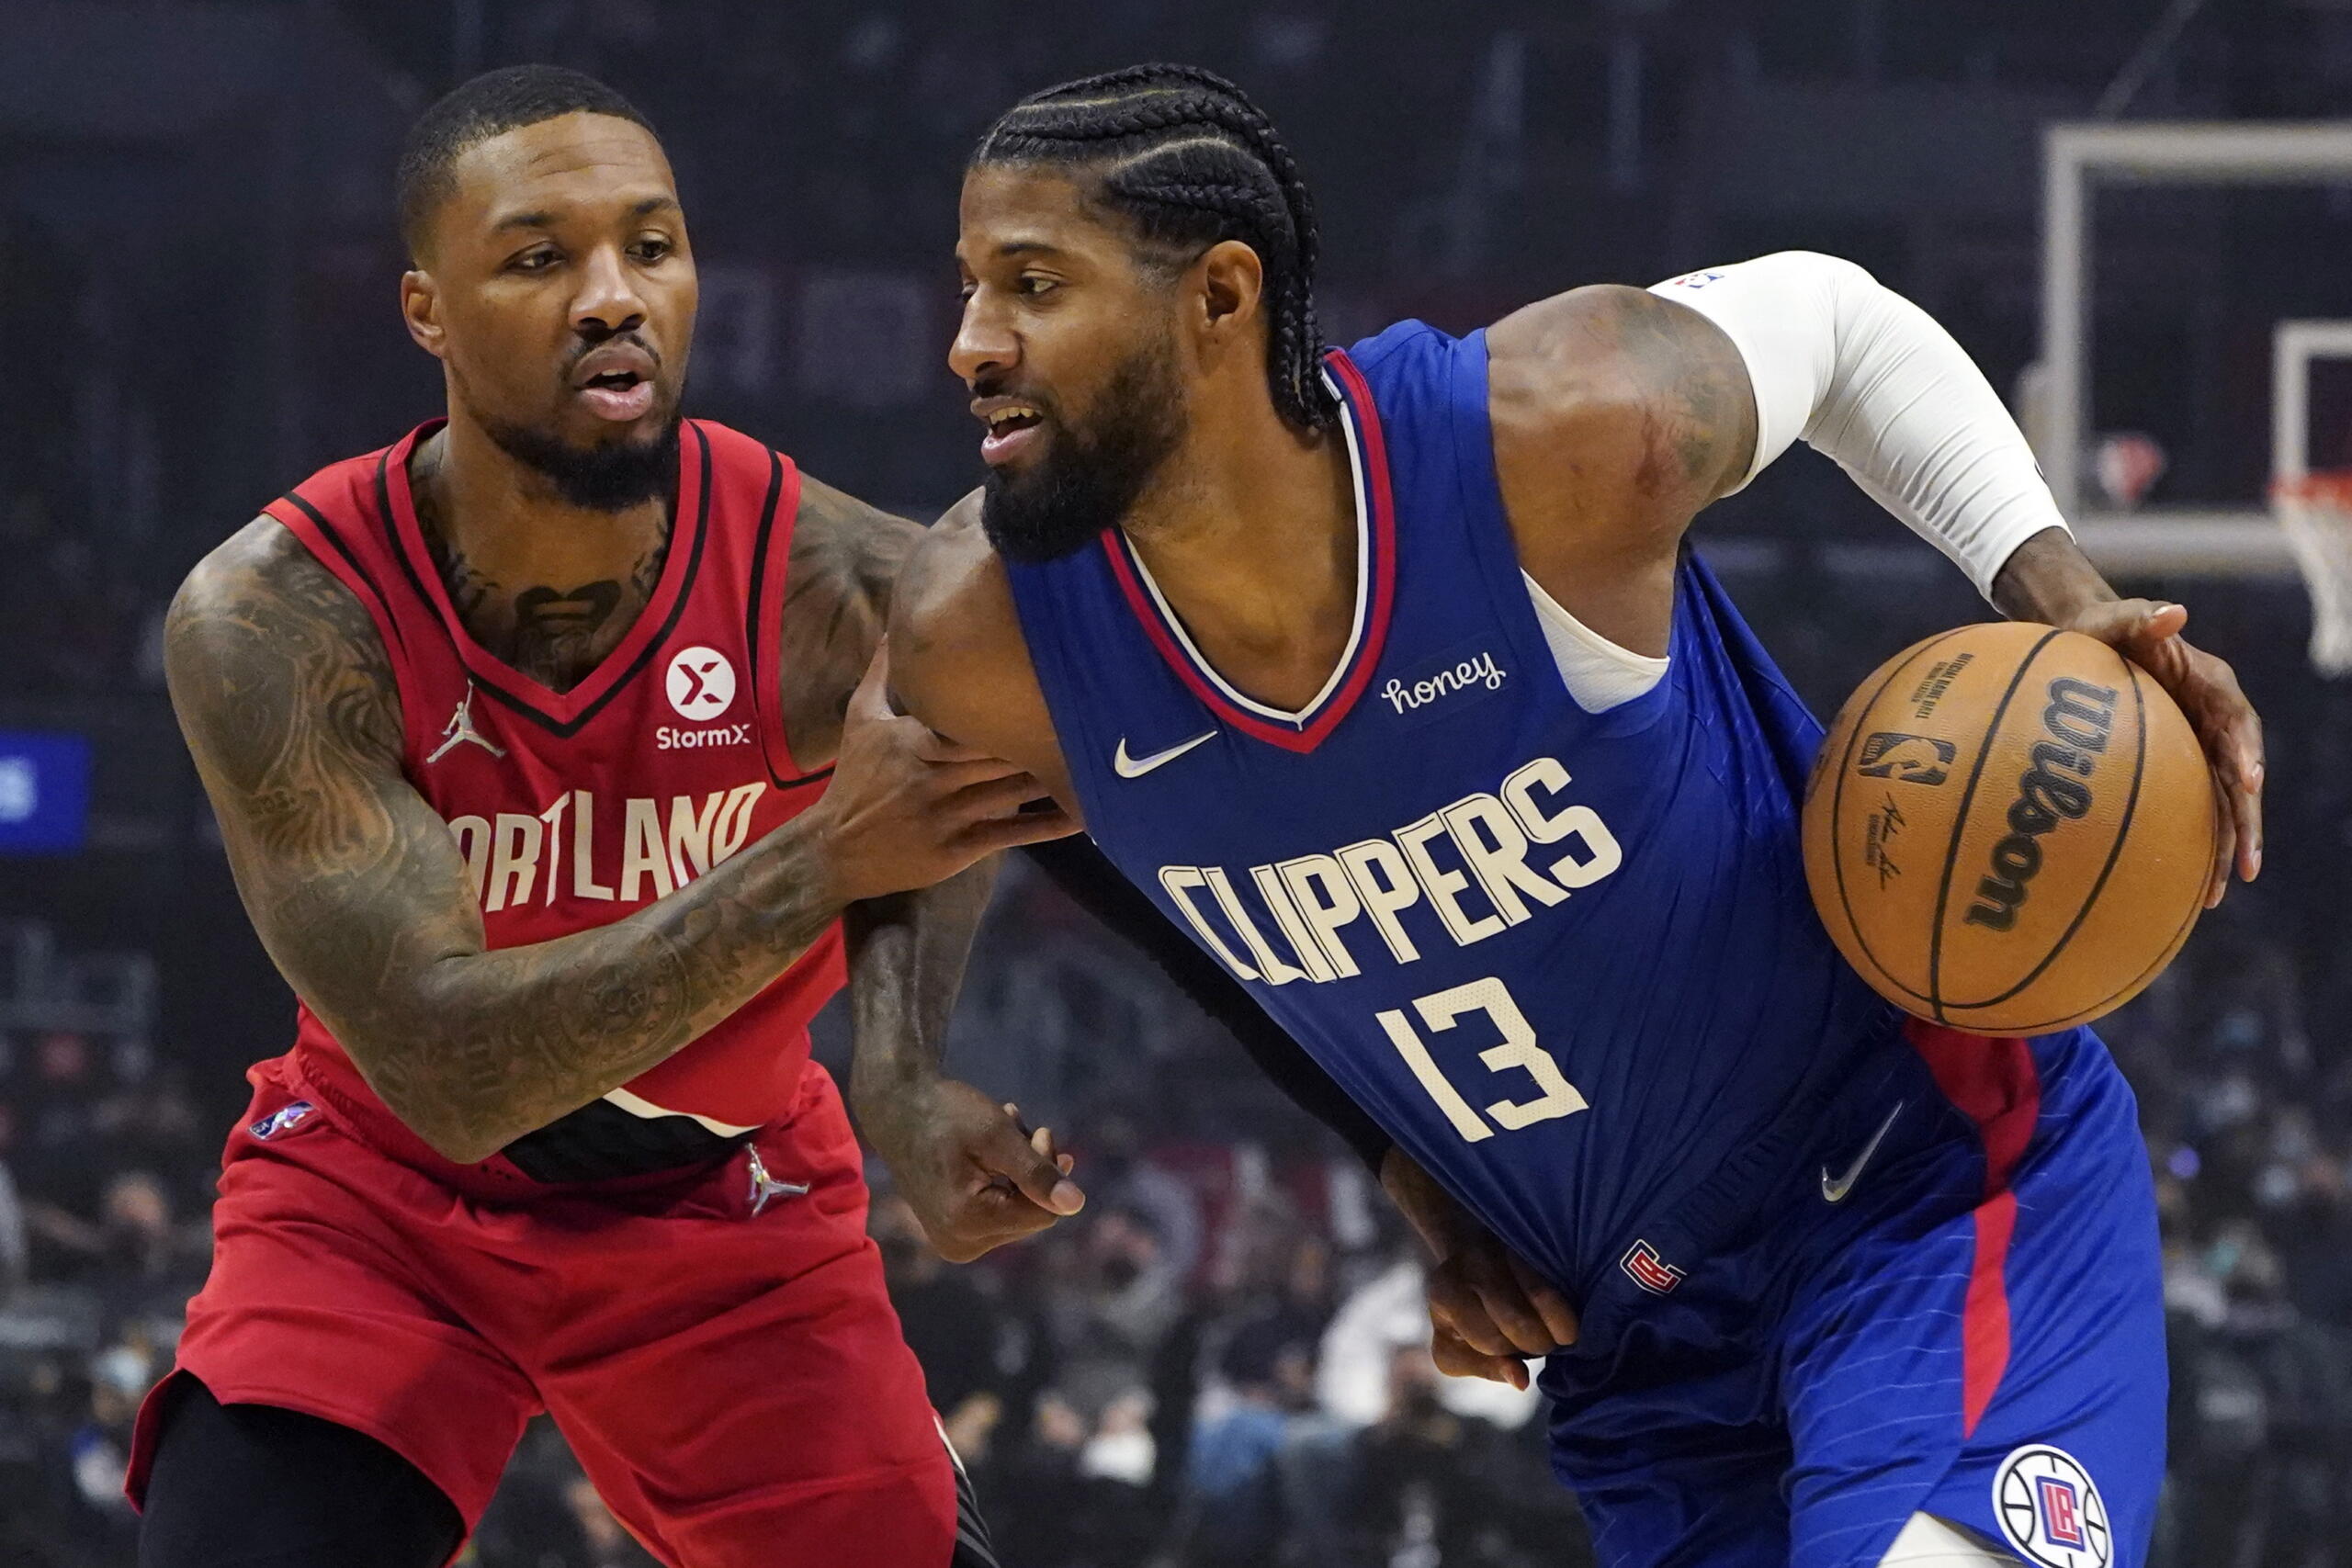 Climate Pledge Arena in Seattle will host the Portland Trail Blazers and Los Angeles Clippers in an NBA preseason game on Oct. 3, the teams announced Wednesday, June 29, 2022.